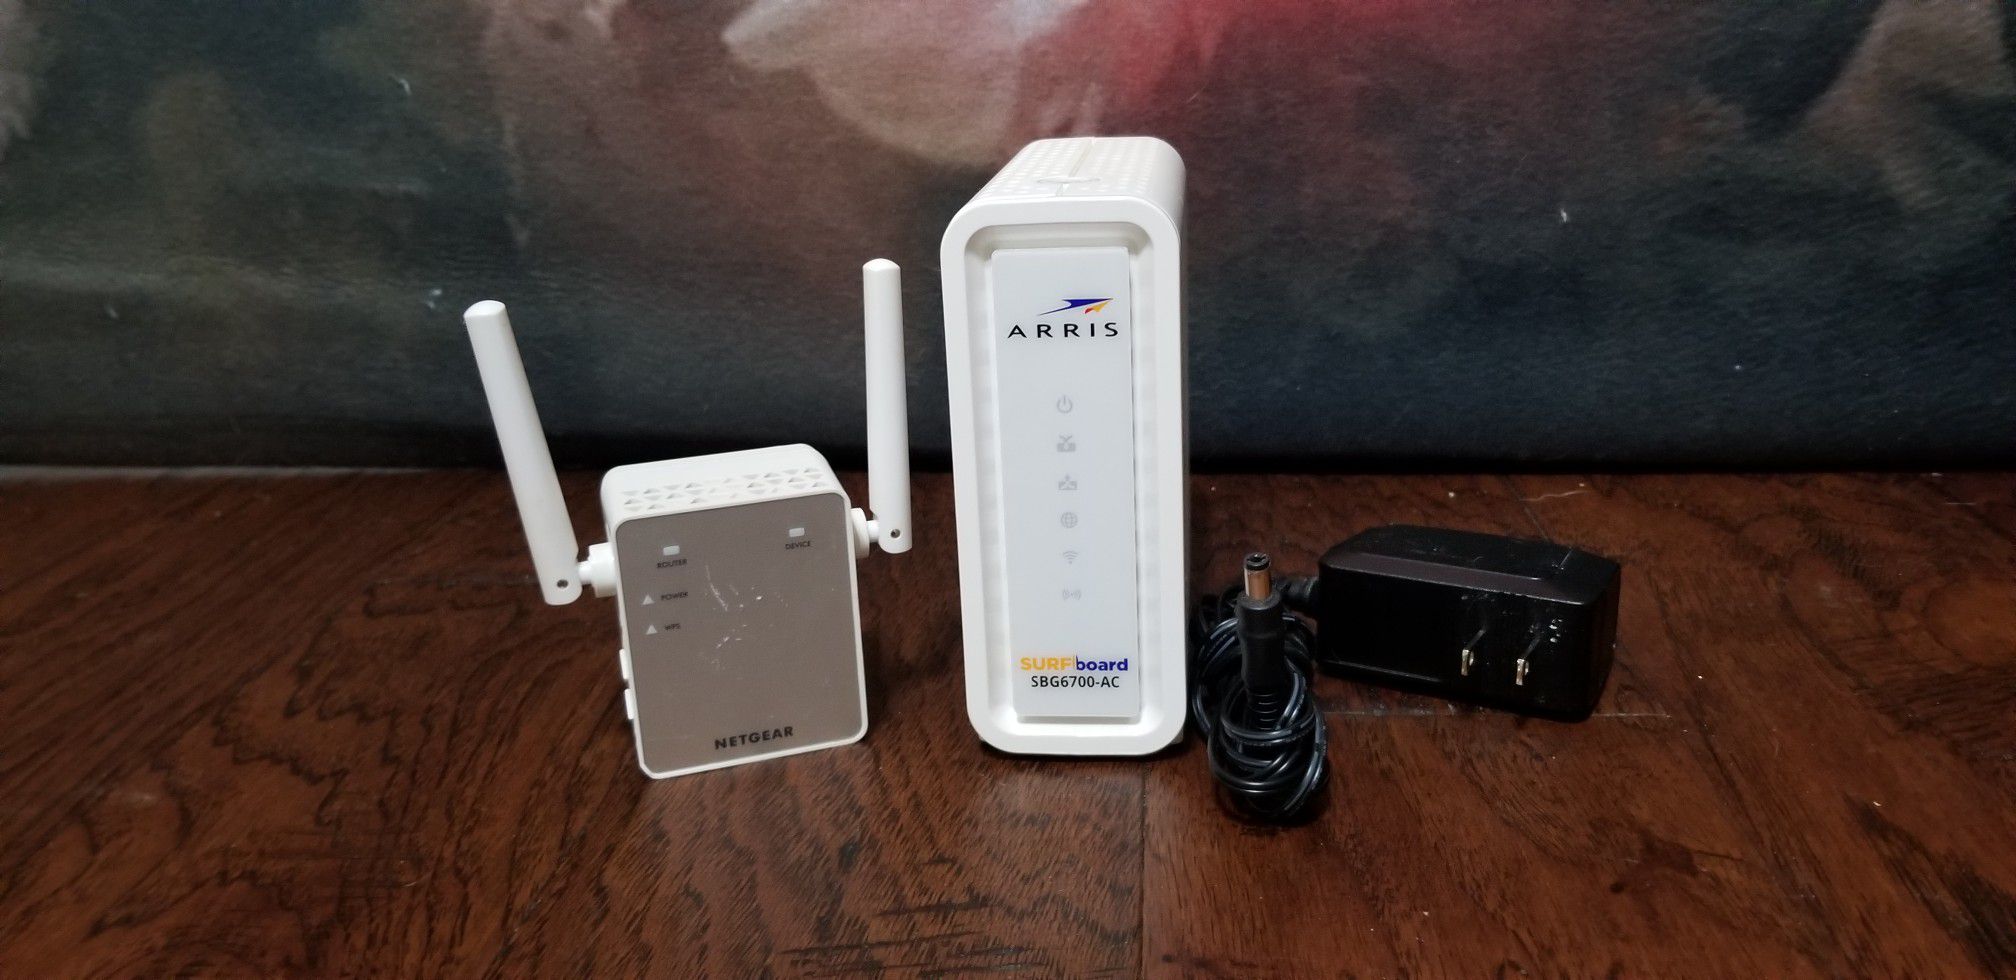 Arris Cable Modem/Router and Netgear WiFi extender